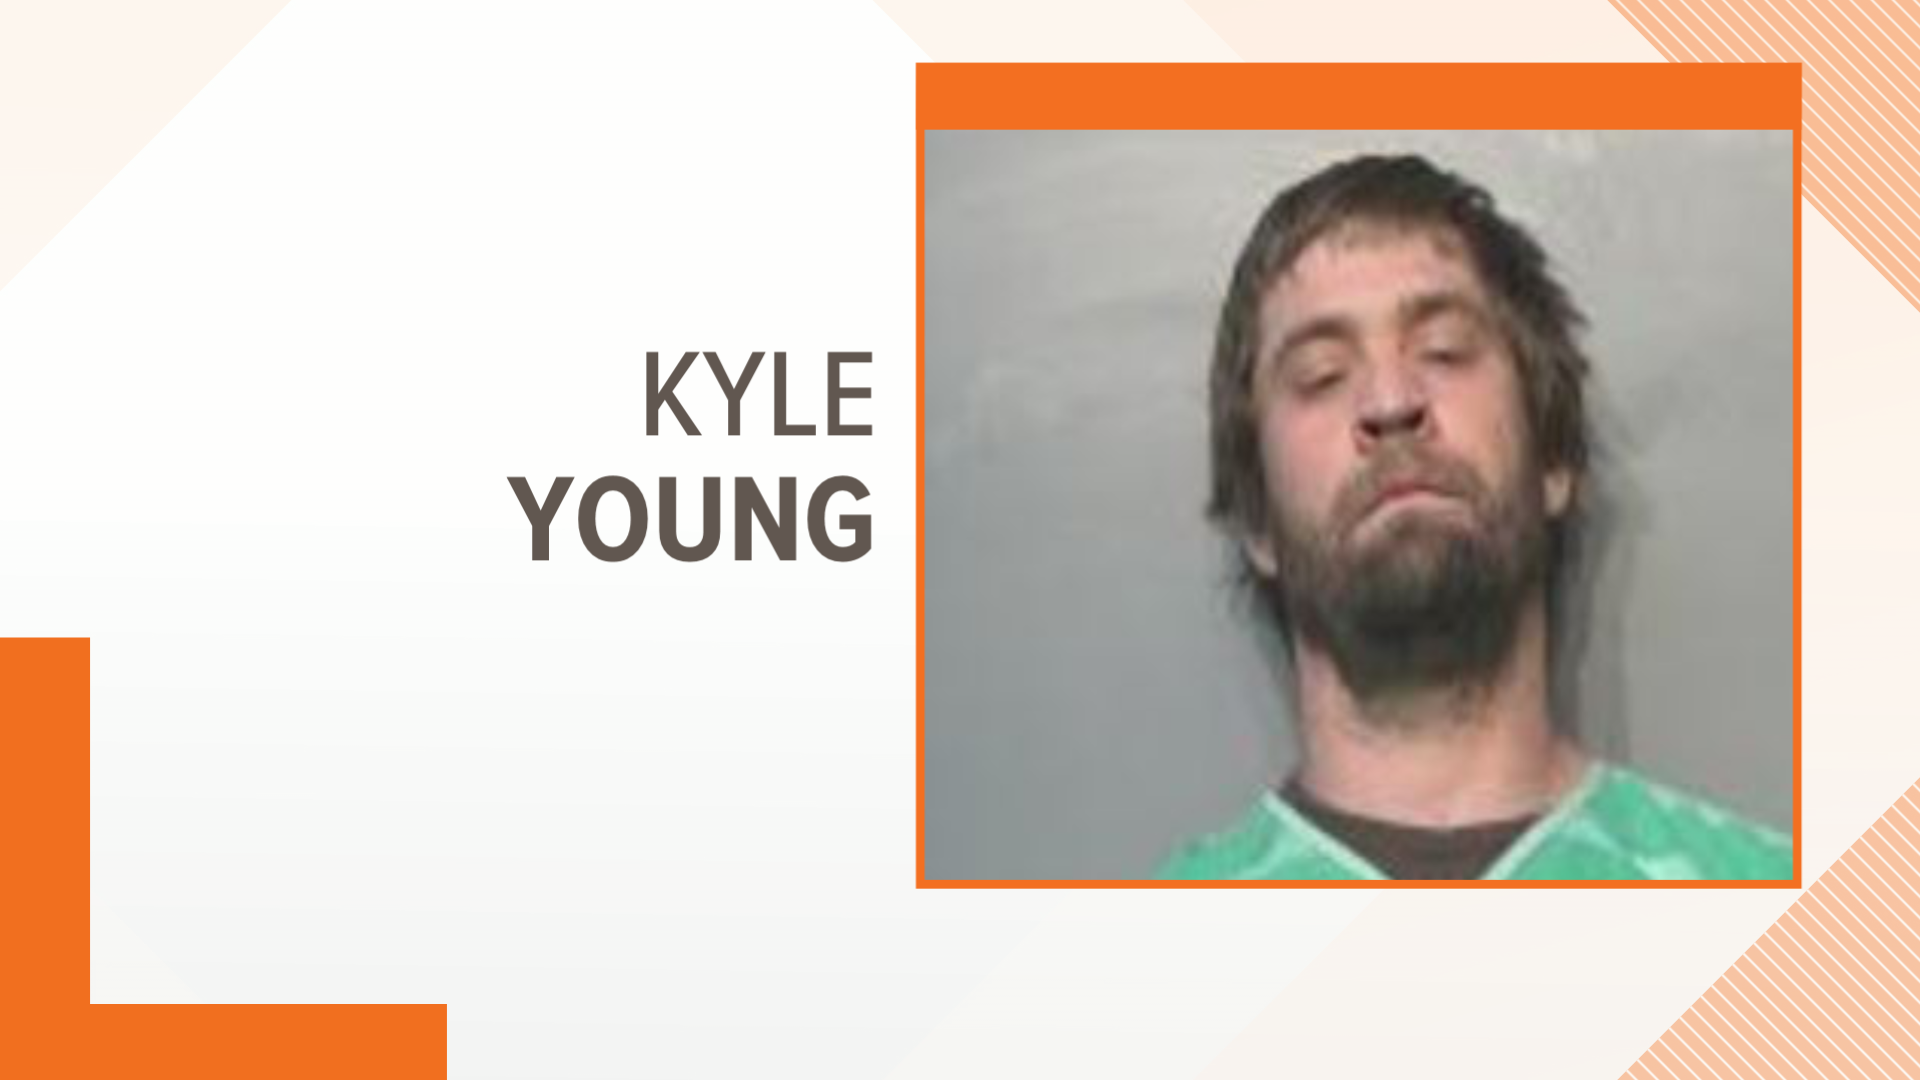 37-year-old Kyle Young allegedly joined two other men in assaulting Metro Police Officer Michael Fanone on Jan. 6.